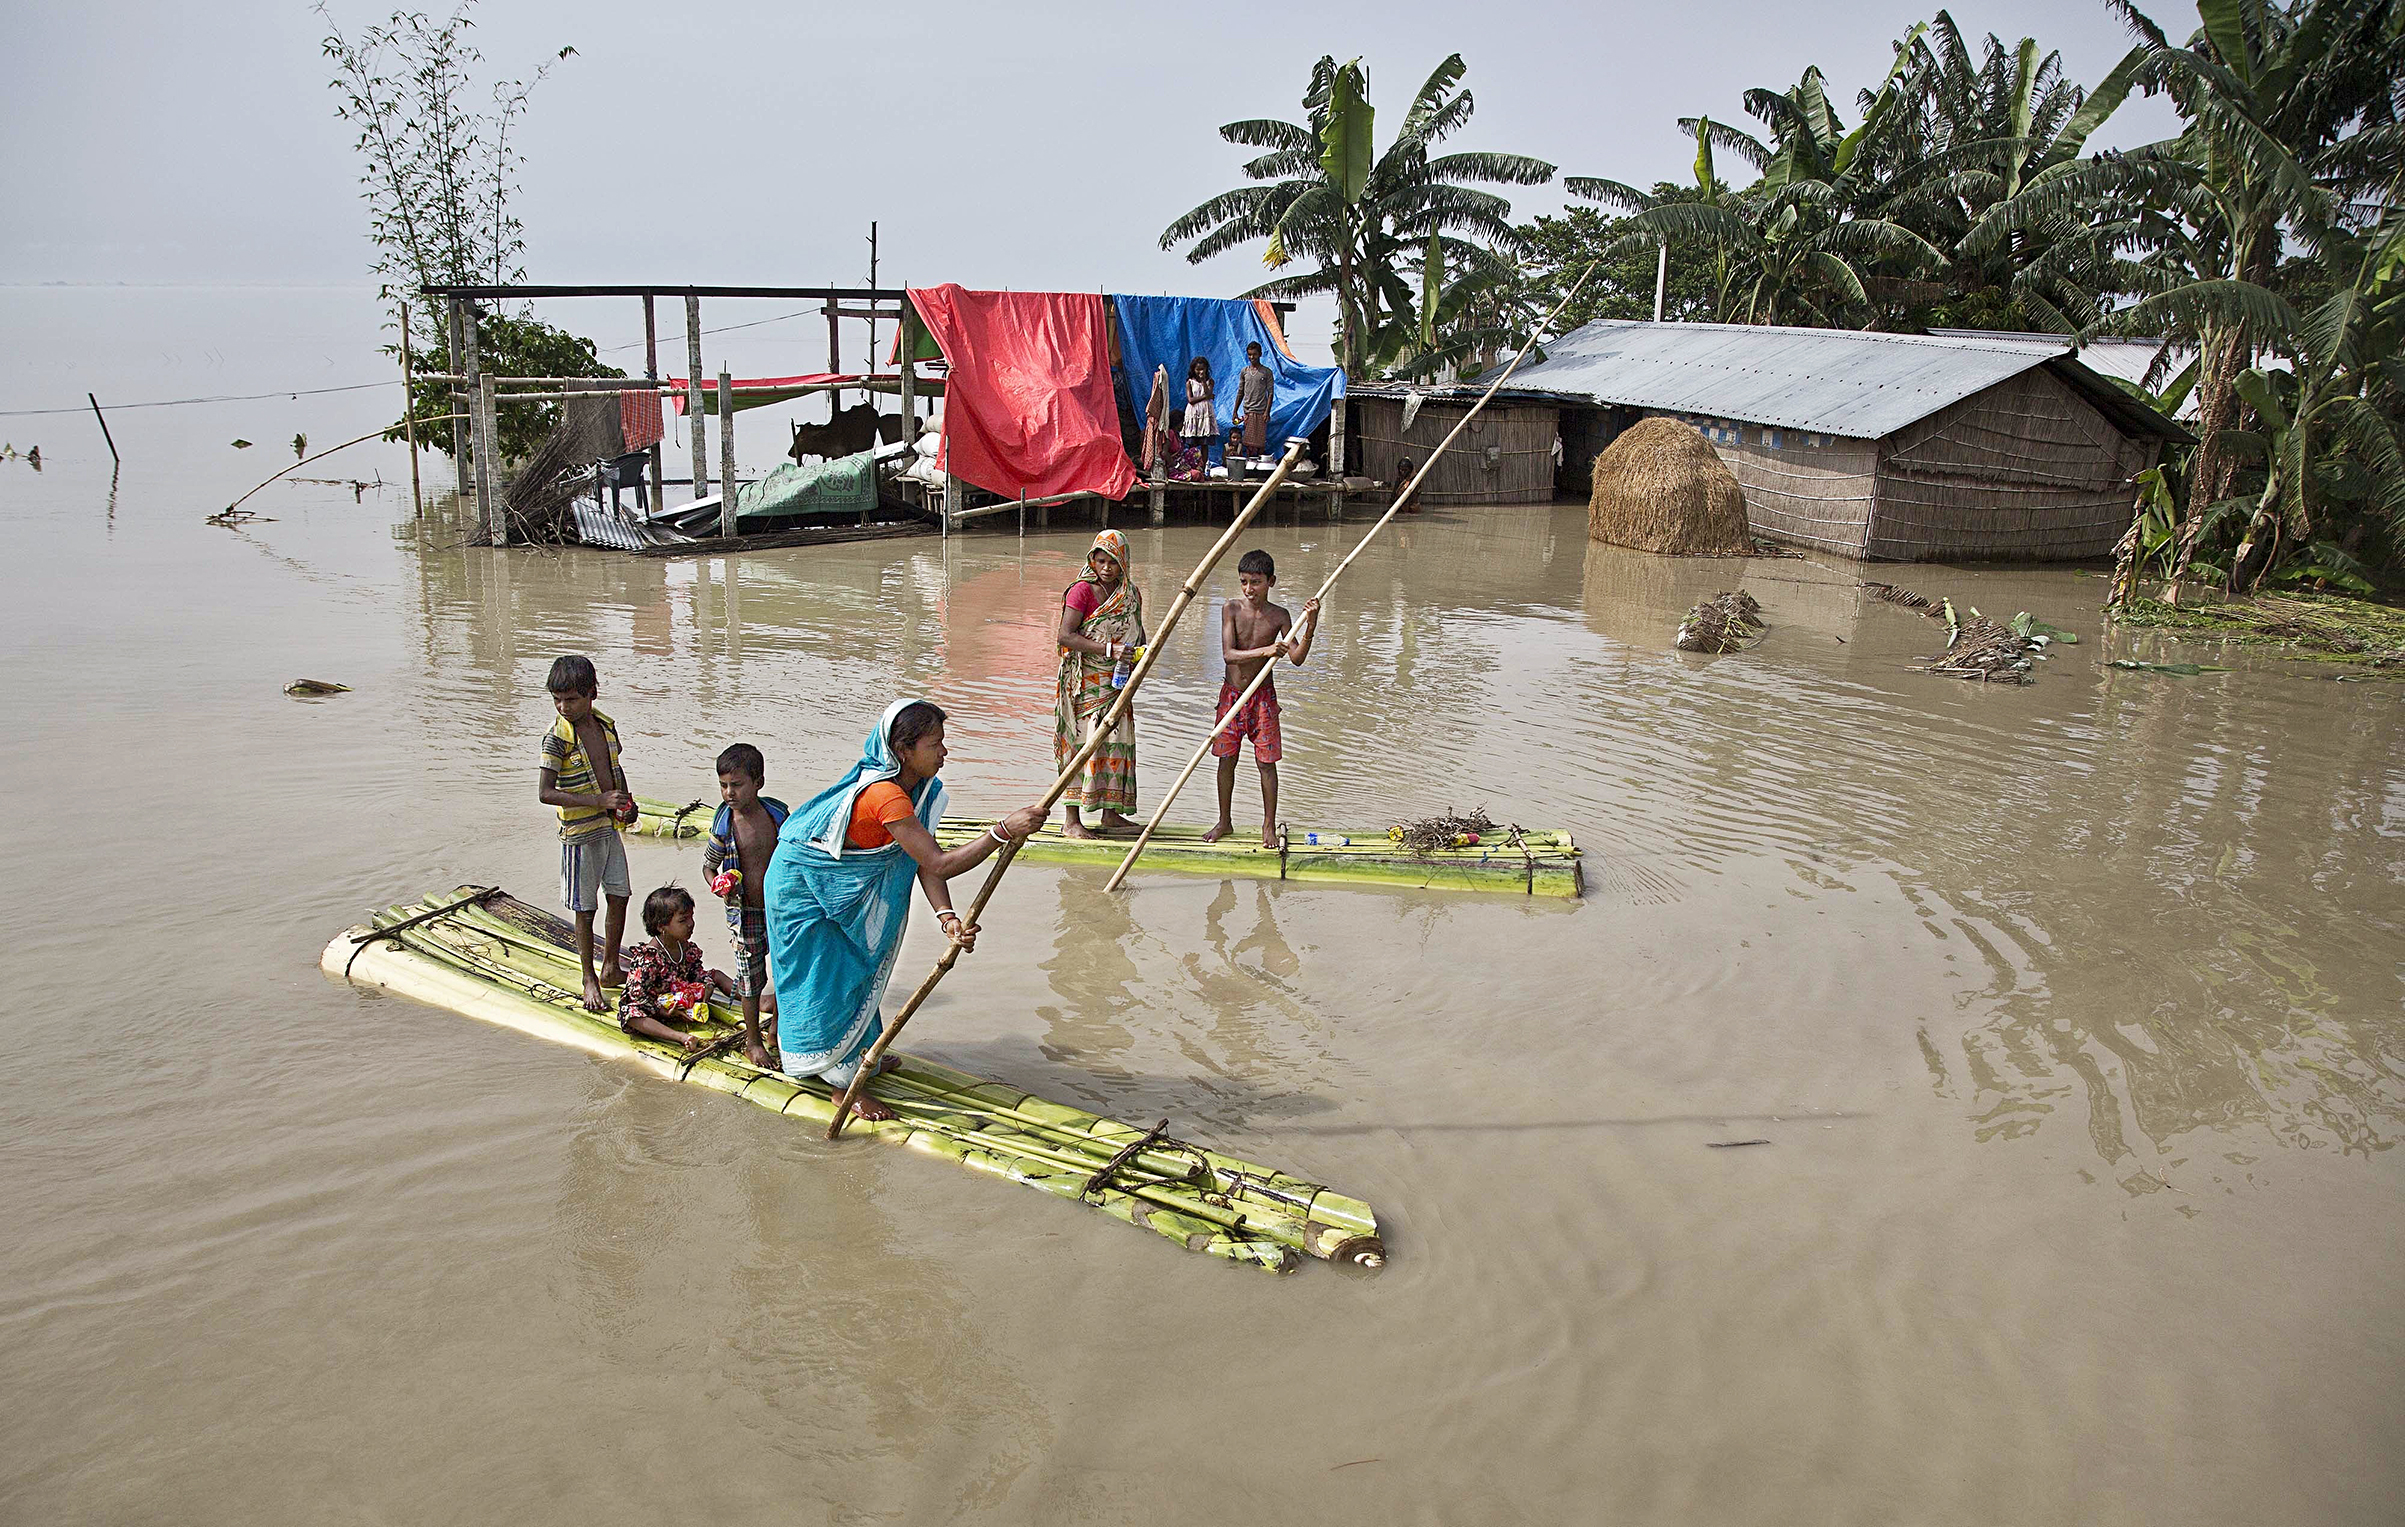 The Brahmaputra River gets severely flooded during monsoon season every year. (Anupam Nath—AP)